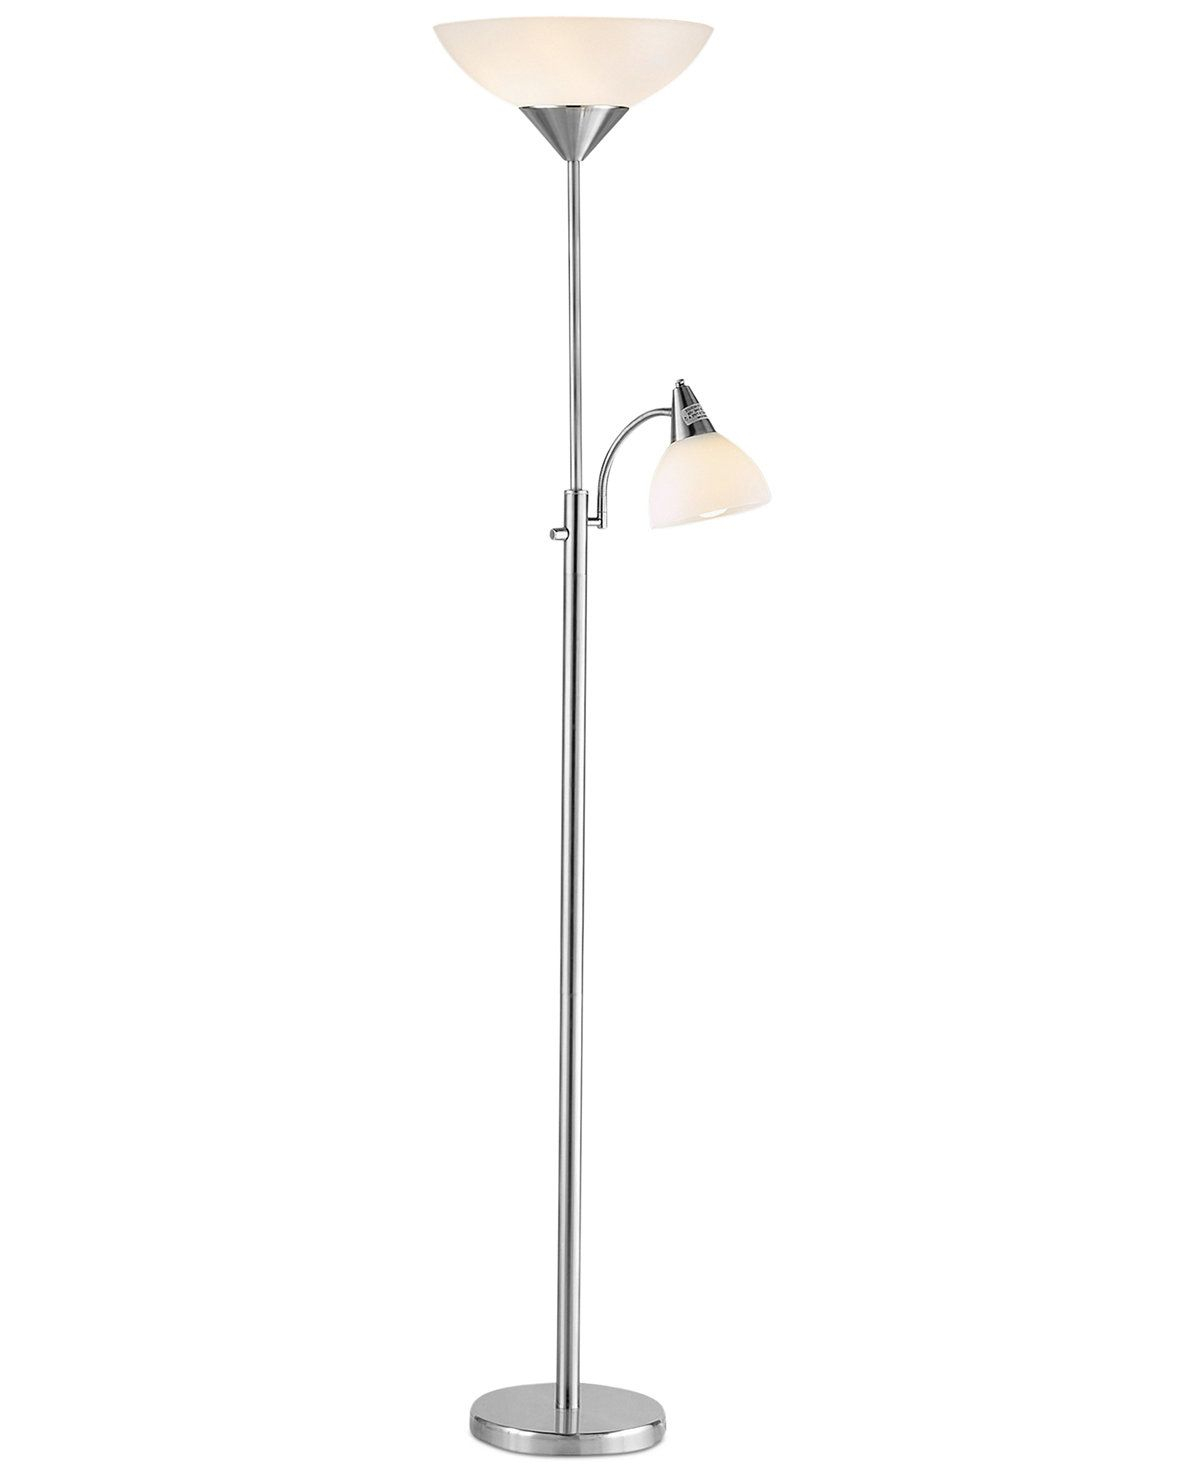 Piedmont Steel Torchiere Floor Lamp Lamptions Torchiere intended for proportions 1200 X 1467